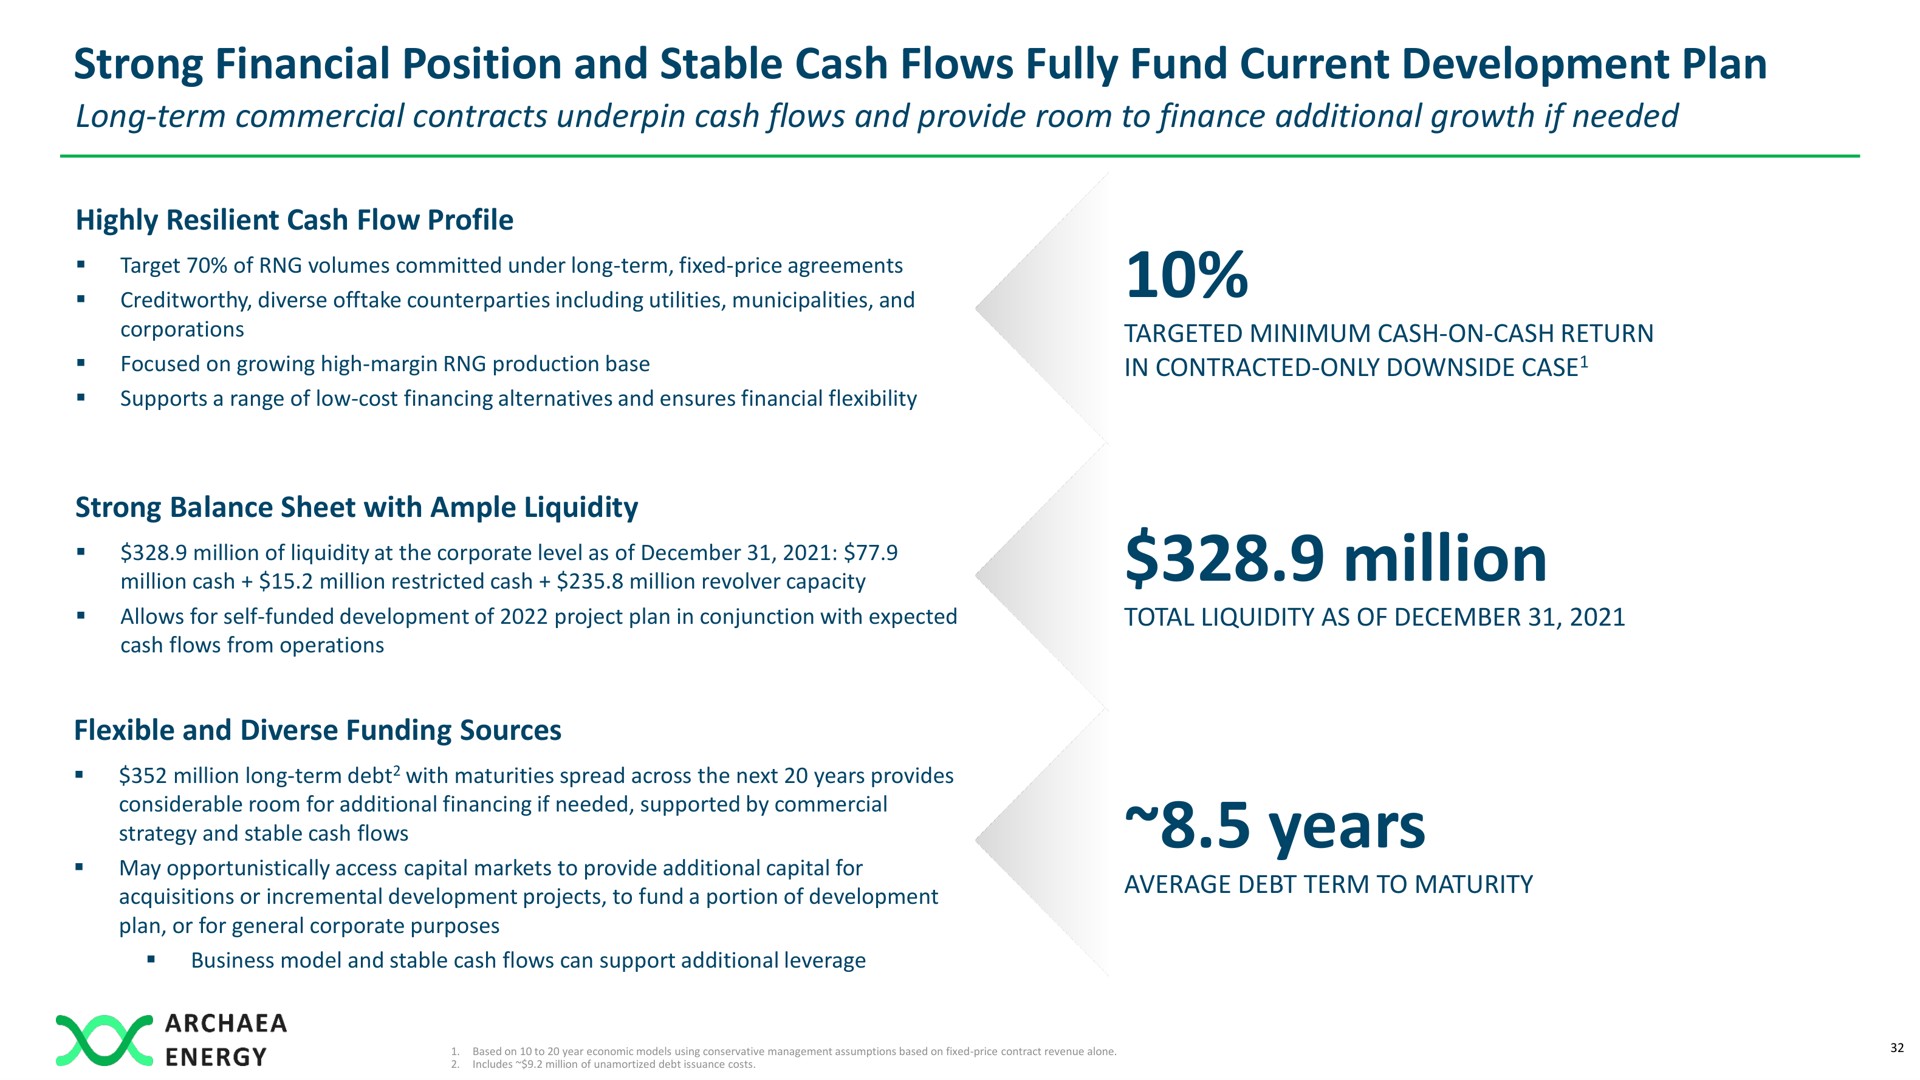 strong financial position and stable cash flows fully fund current development plan million years | Archaea Energy